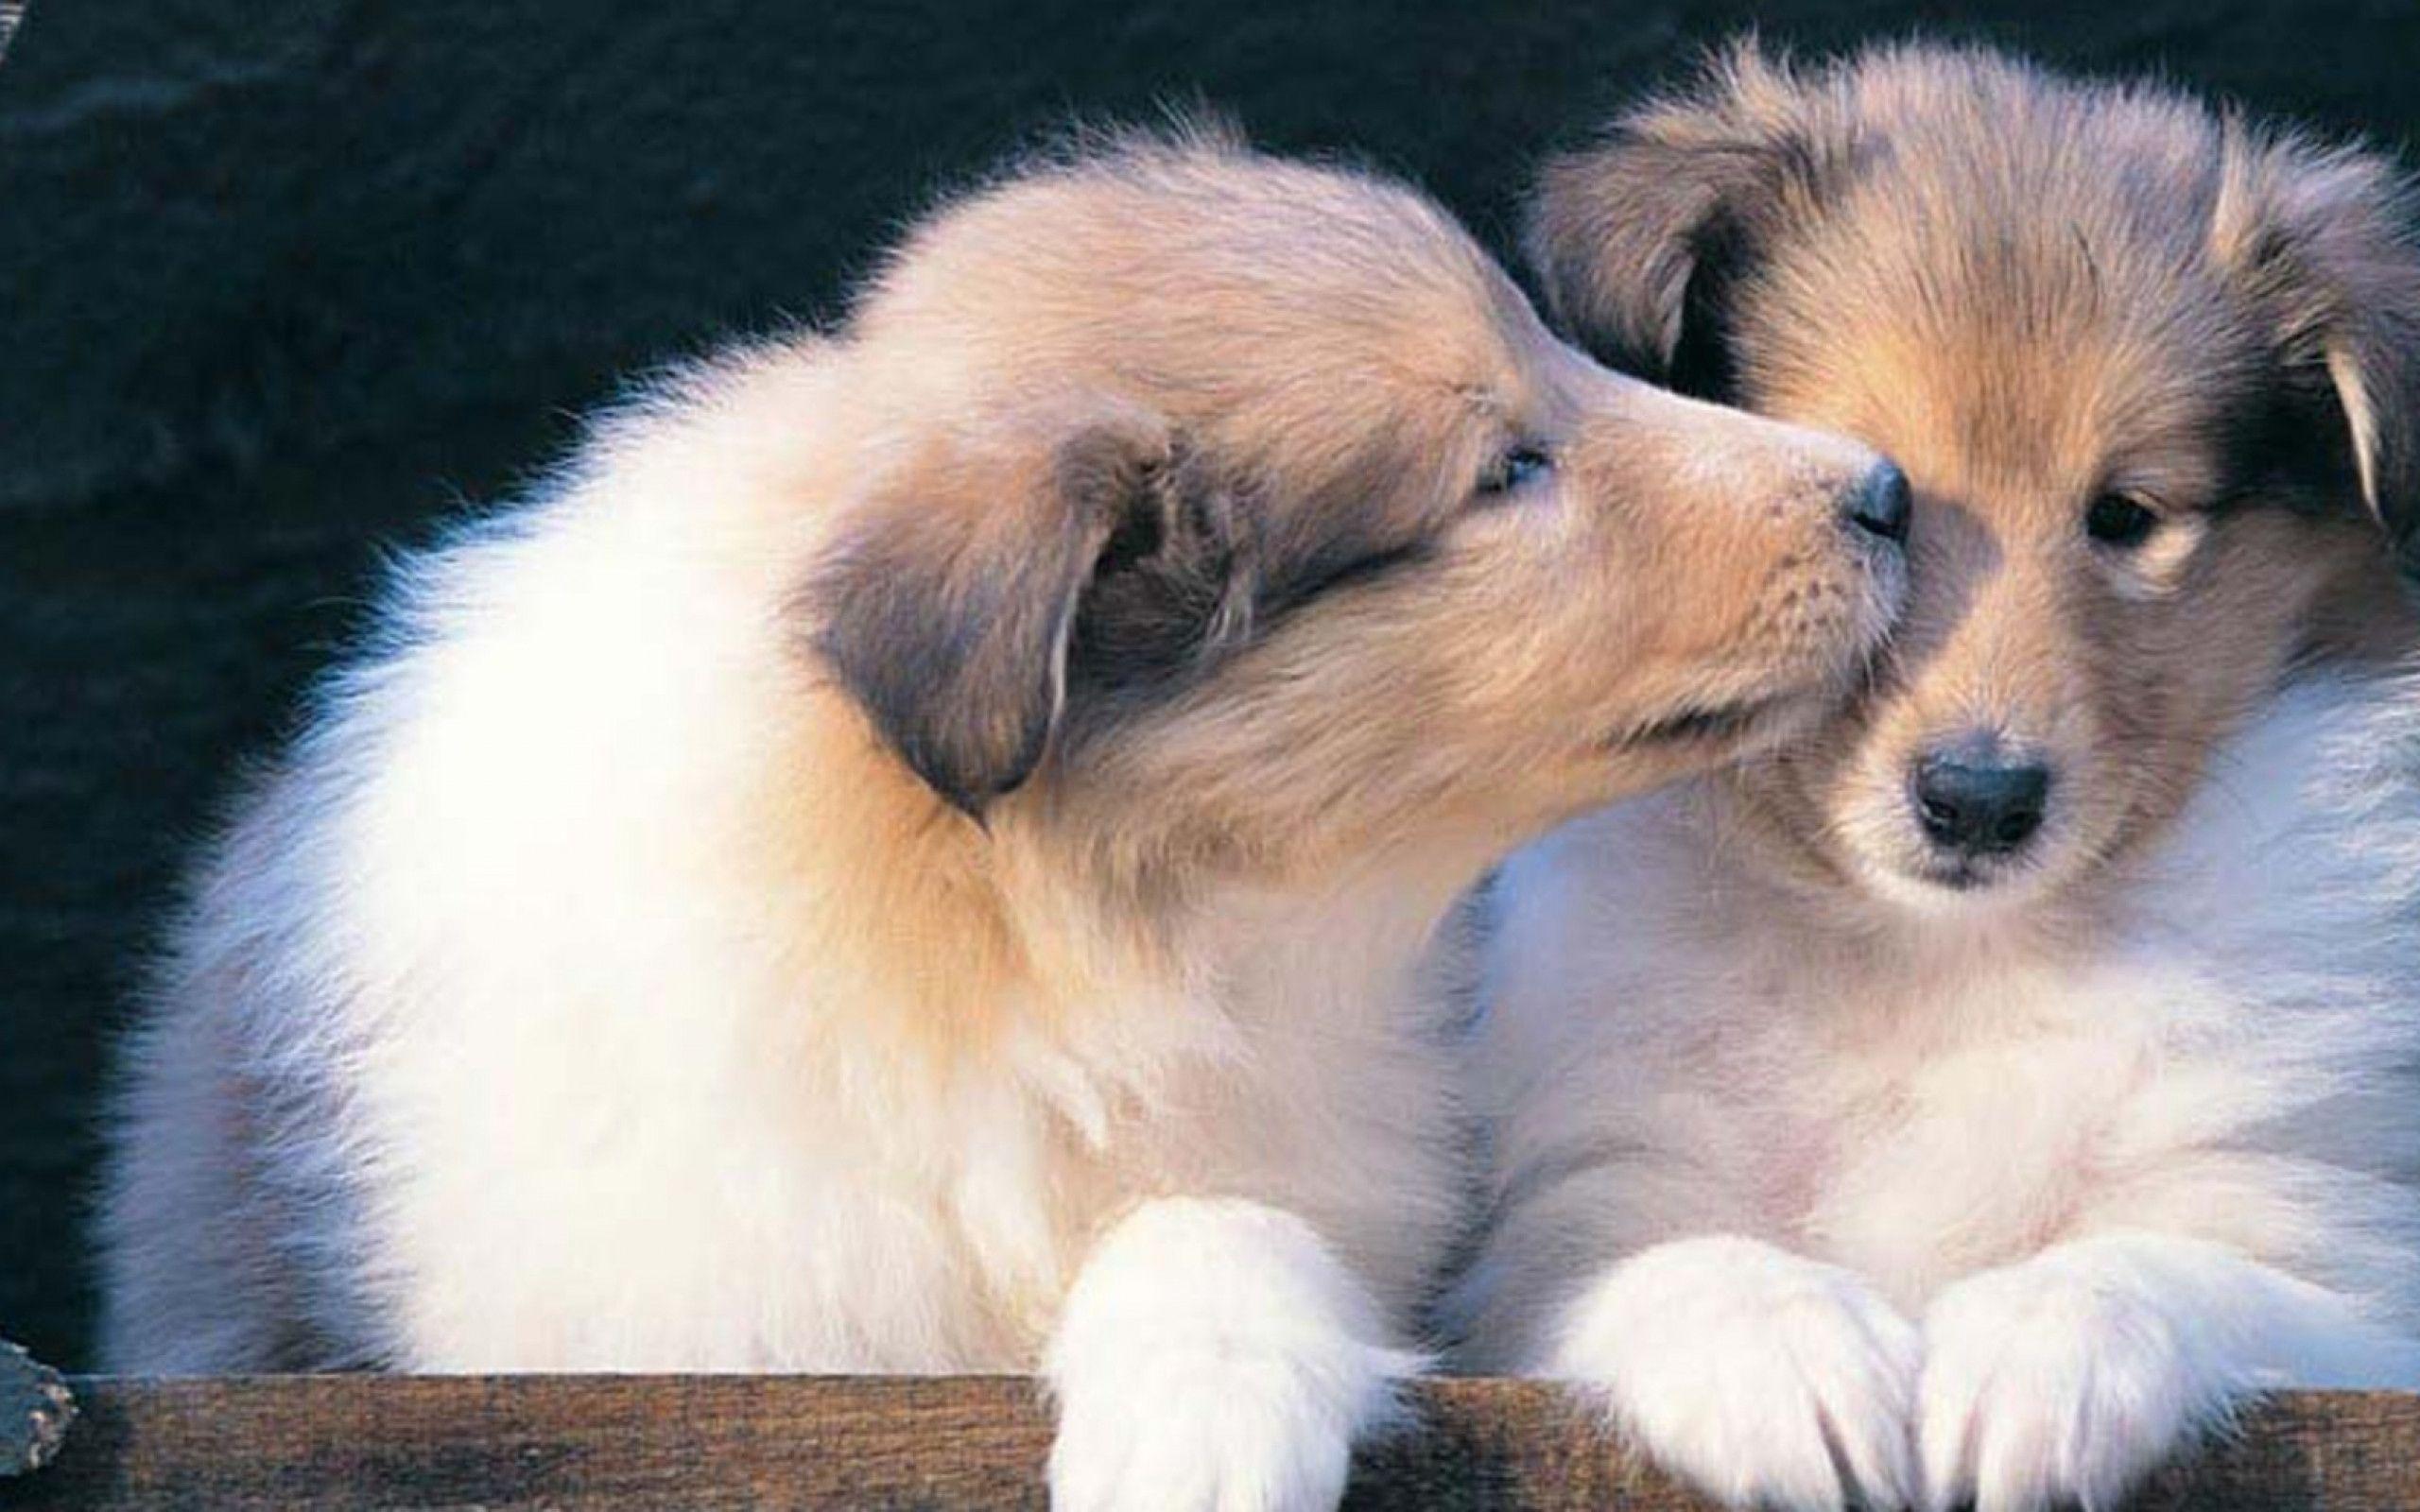 Wallpapers Of Puppies - Wallpaper Cave